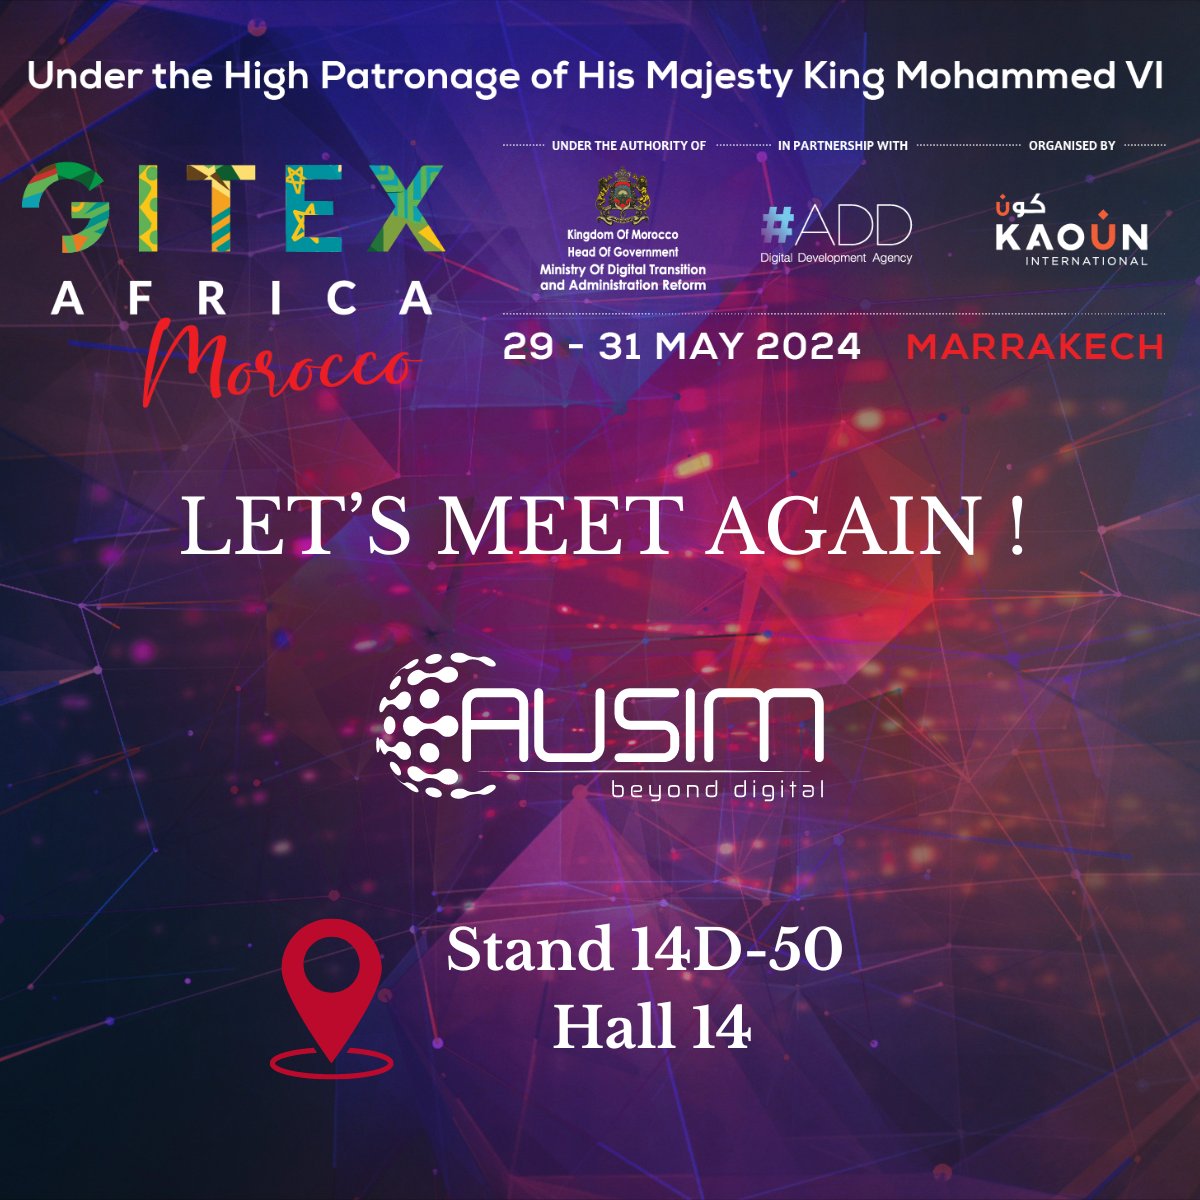 Let's meet again at GITEX AFRICA 🎉!
AUSIM will be present in Hall 14, Stand 14D-50.
Don't miss out on this opportunity to connect and explore the future of digital transformation 🌍🚀
#GitexAfrica #AUSIM #DigitalTransformation #TechEvent